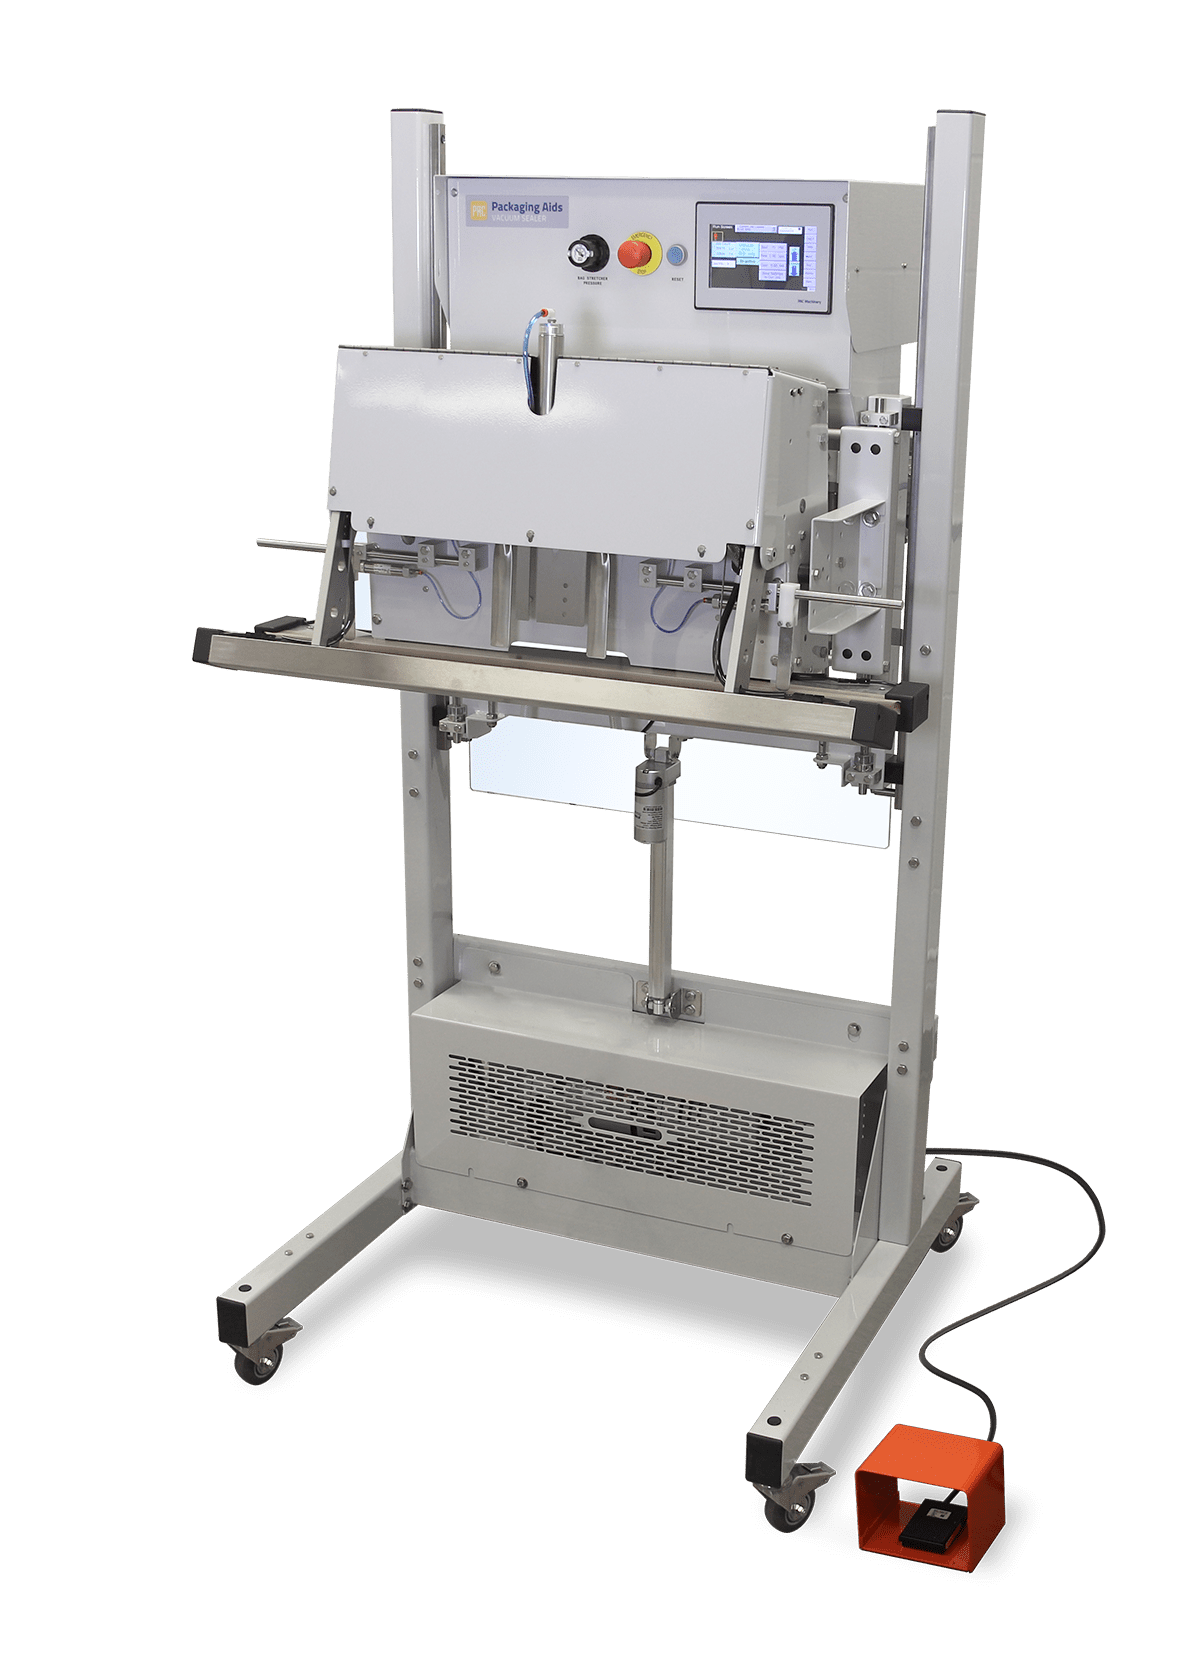 https://www.pacmachinery.com/wp-content/uploads/PVK-BIB-Industrial-Vacuum-Sealer-1200px.png